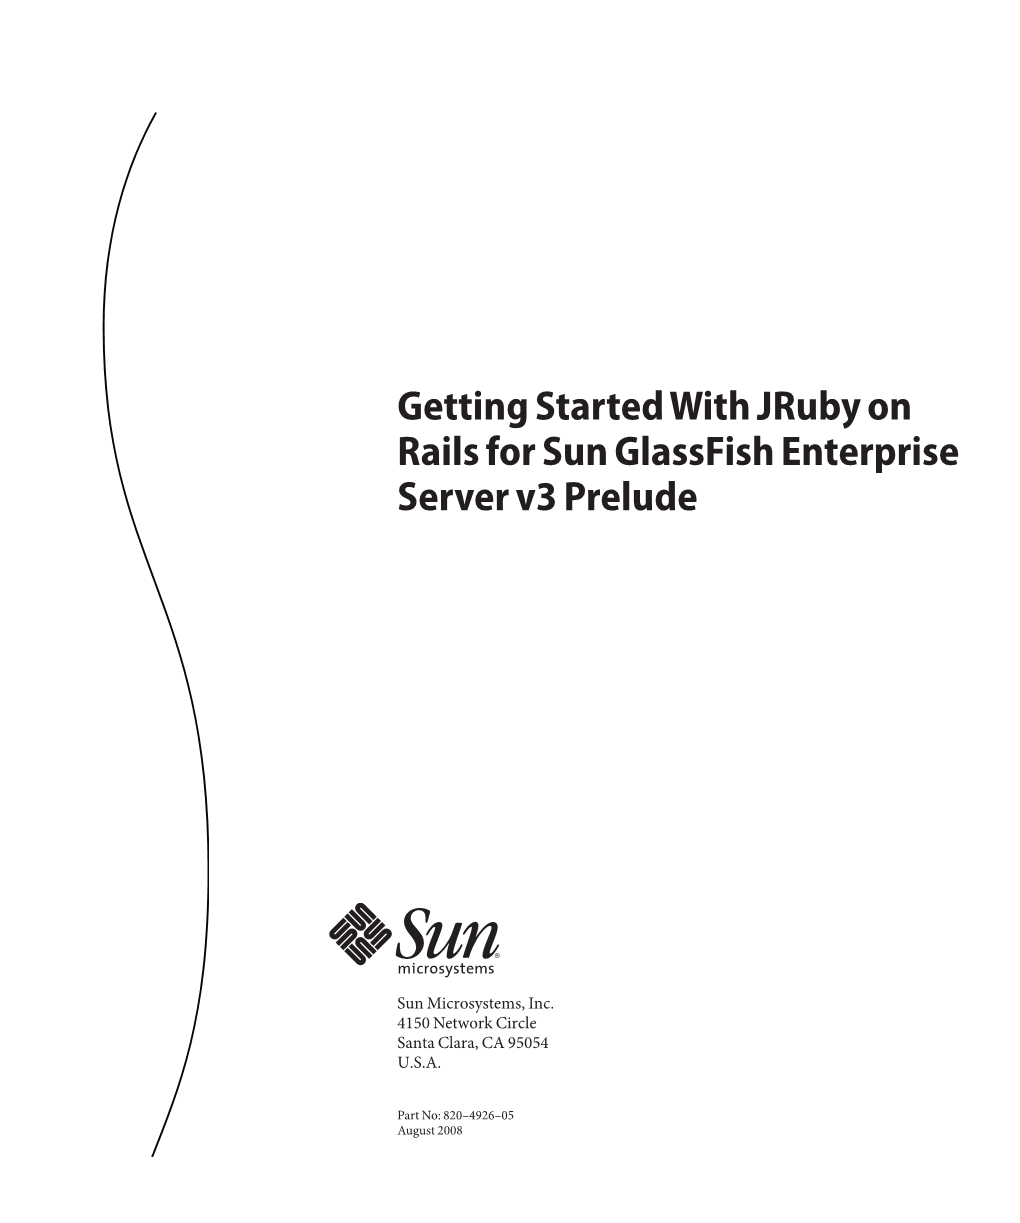 Getting Started with Jruby on Rails for Sun Glassfish Enterprise